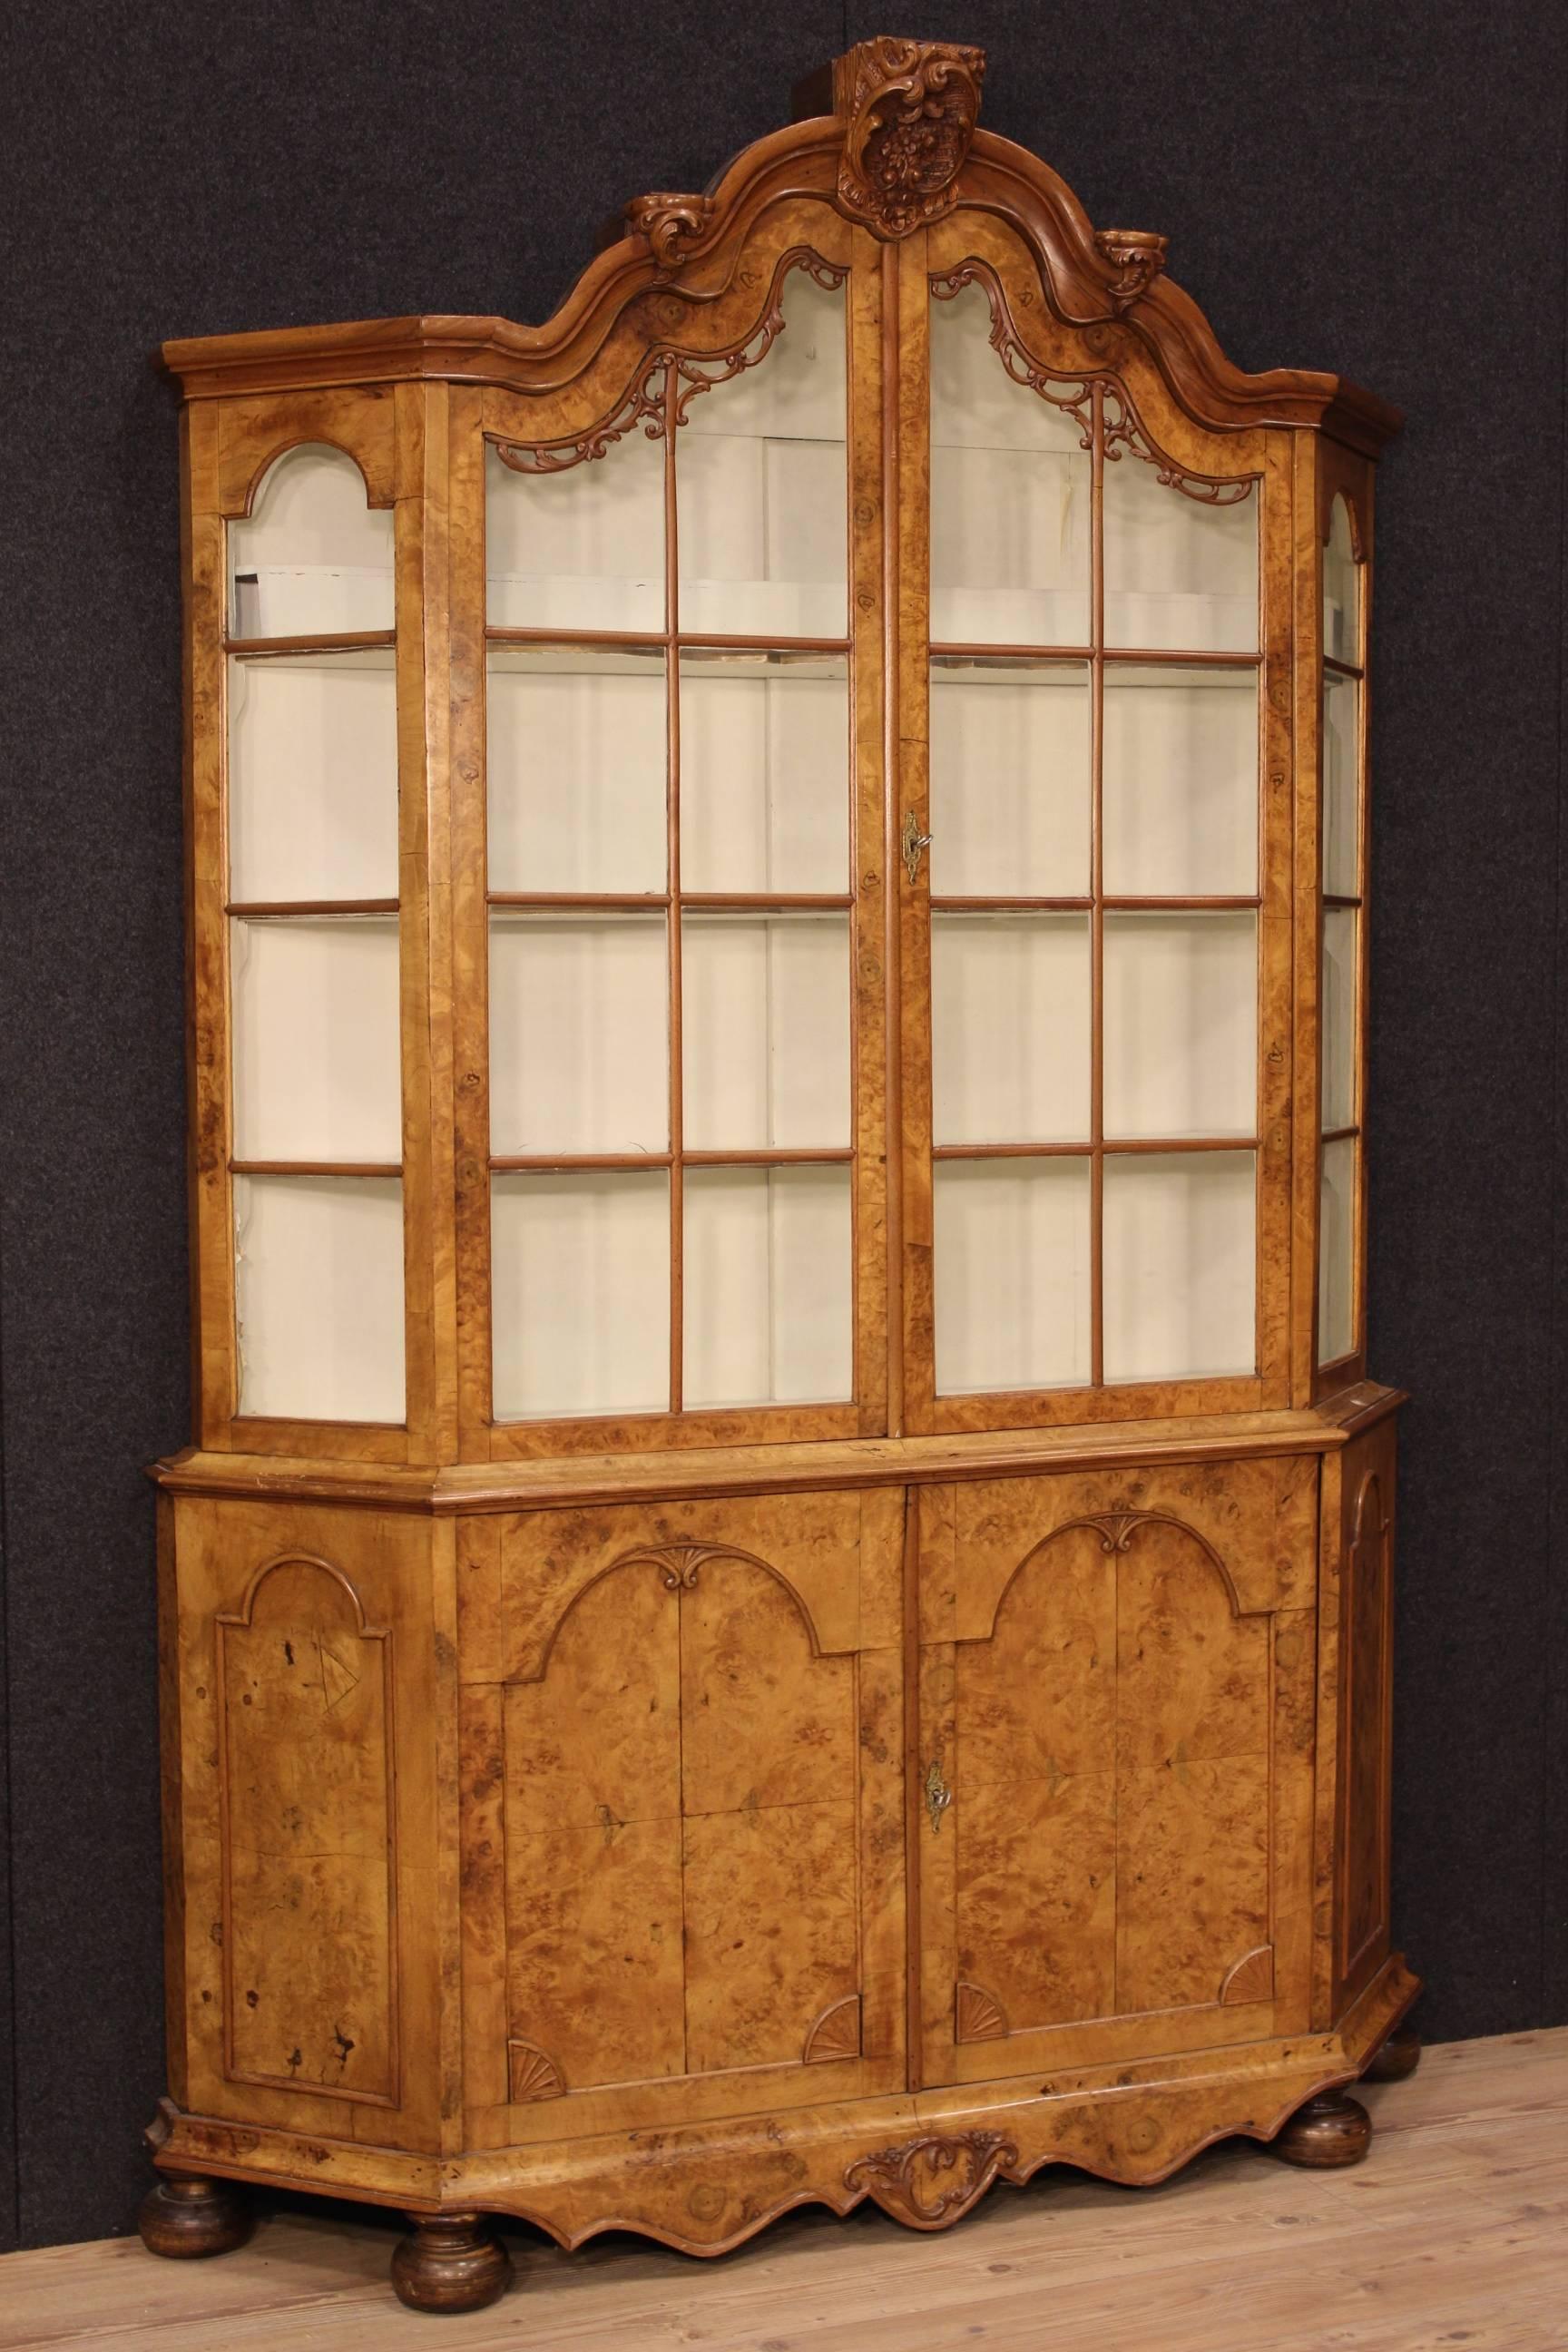 Dutch bookcase of the late 19th century. Furniture carved in walnut and burl elm. Vitrine built as a sideboard in the lower part and as a showcase with two doors in the upper part. Furniture complete with two functioning keys. Painted inside of the